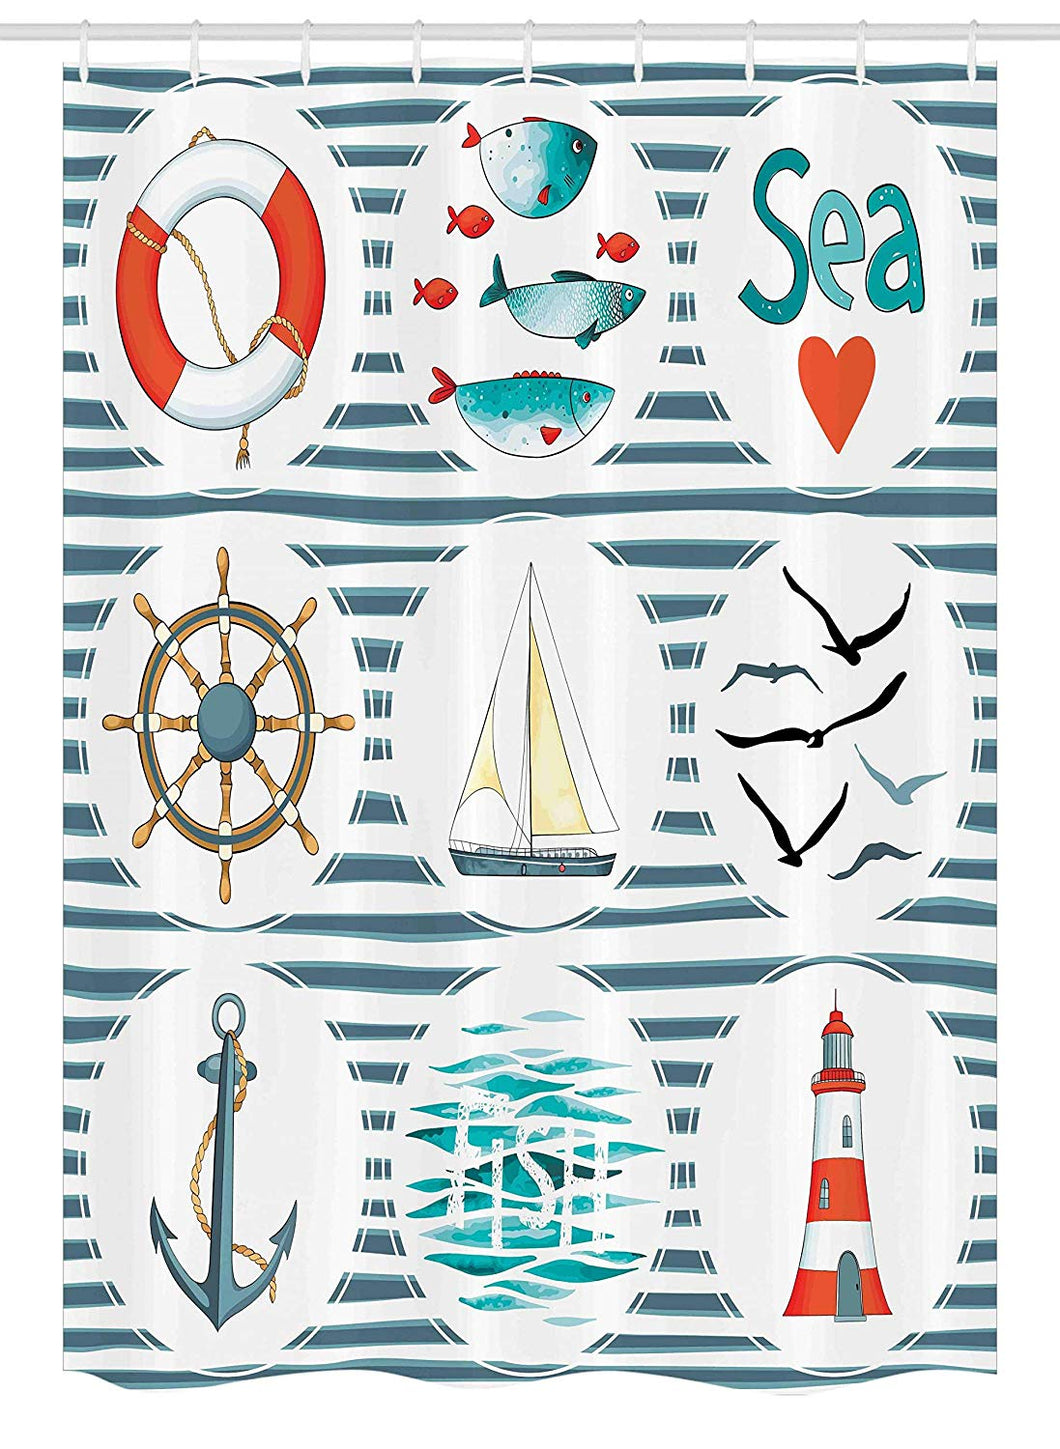 Ambesonne Nautical Stall Shower Curtain, Sea Set with Fishes Lifebuoy Gulls Lighthouse Marine Inspired Maritime Theme, Fabric Bathroom Decor Set with Hooks, 54 W x 78 L Inches, White Red Blue